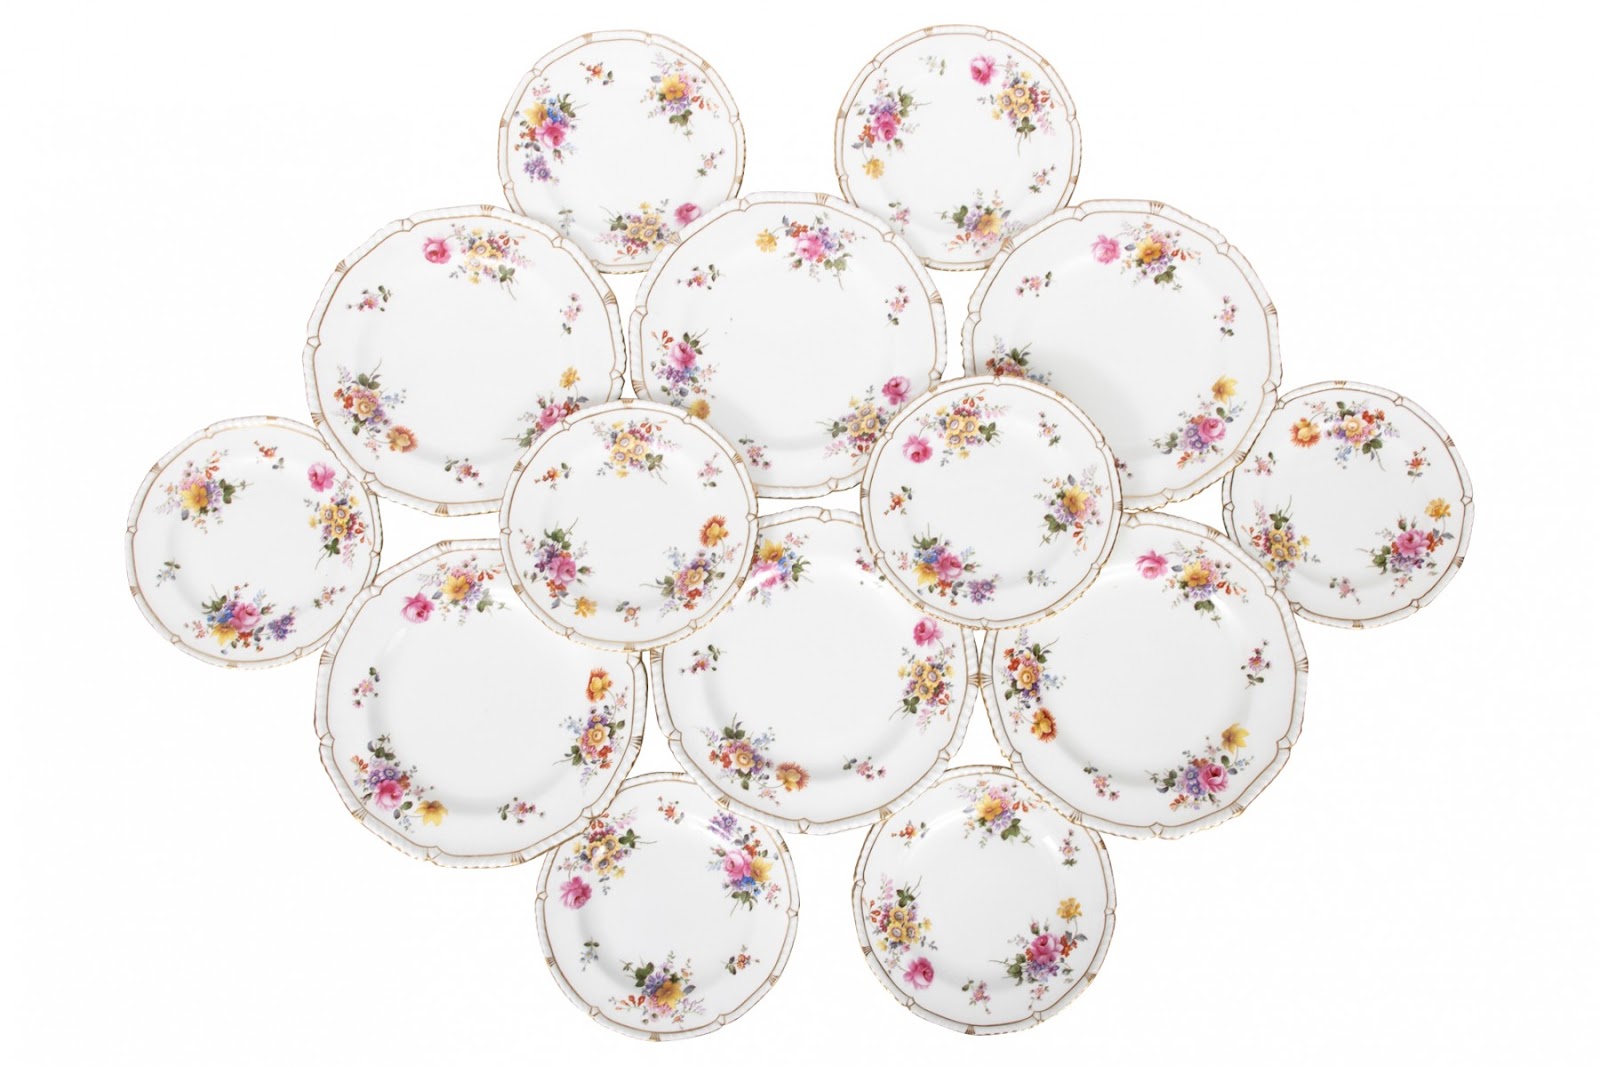 Fabulous Set of English Royal Crown Derby Ceramic Dishes, 6 Lunch Dishes & 8 Bread & Butter Dishes 